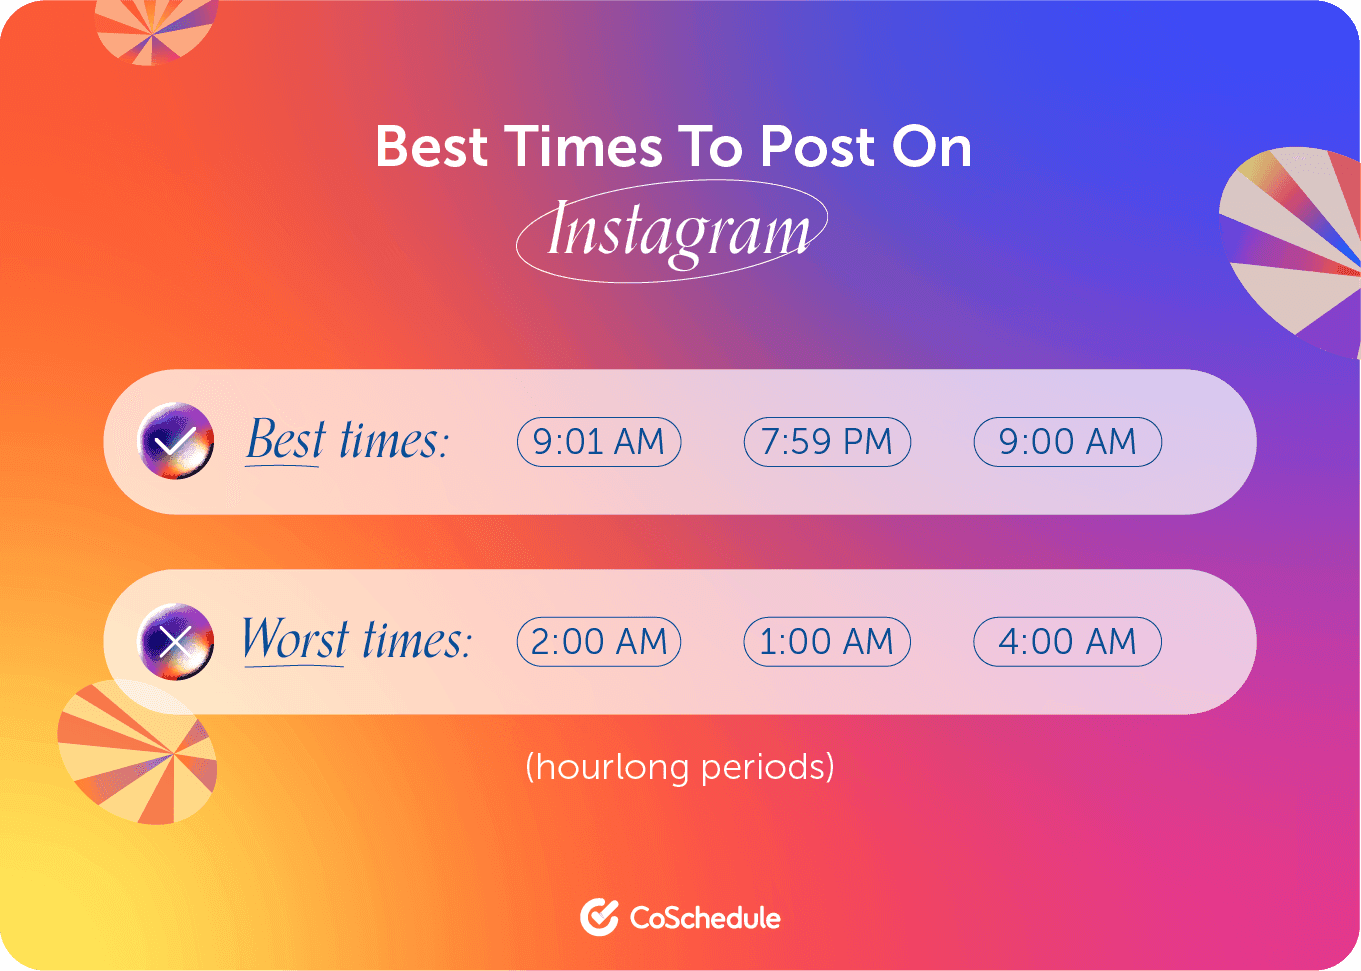 The best and worst times to post on Instagram